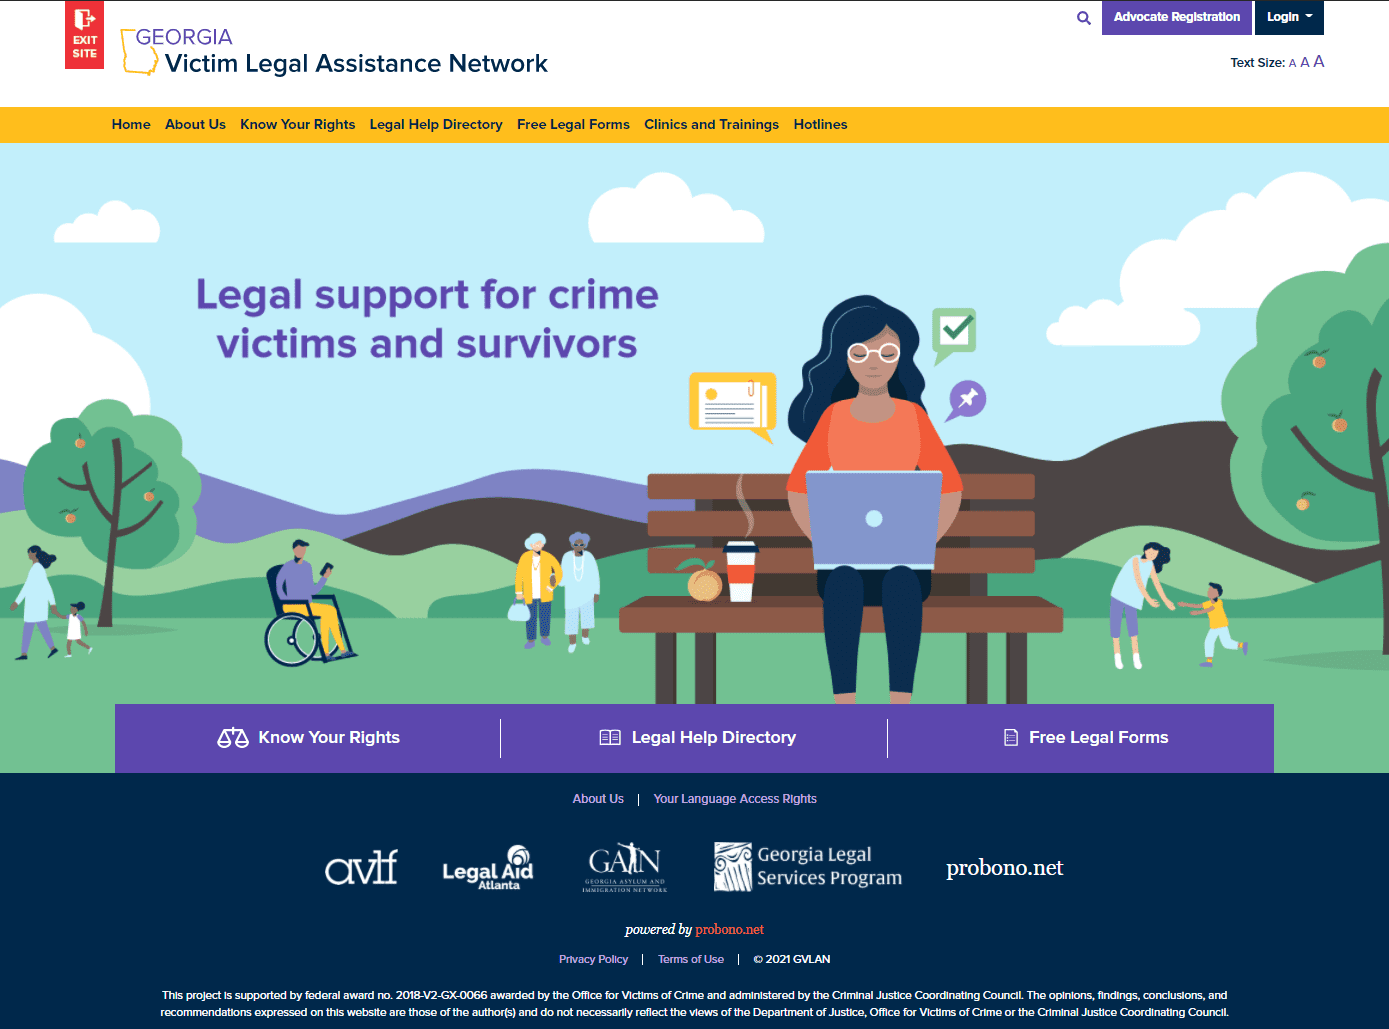 A screen shot of the home page for the hidden legal assistance network.